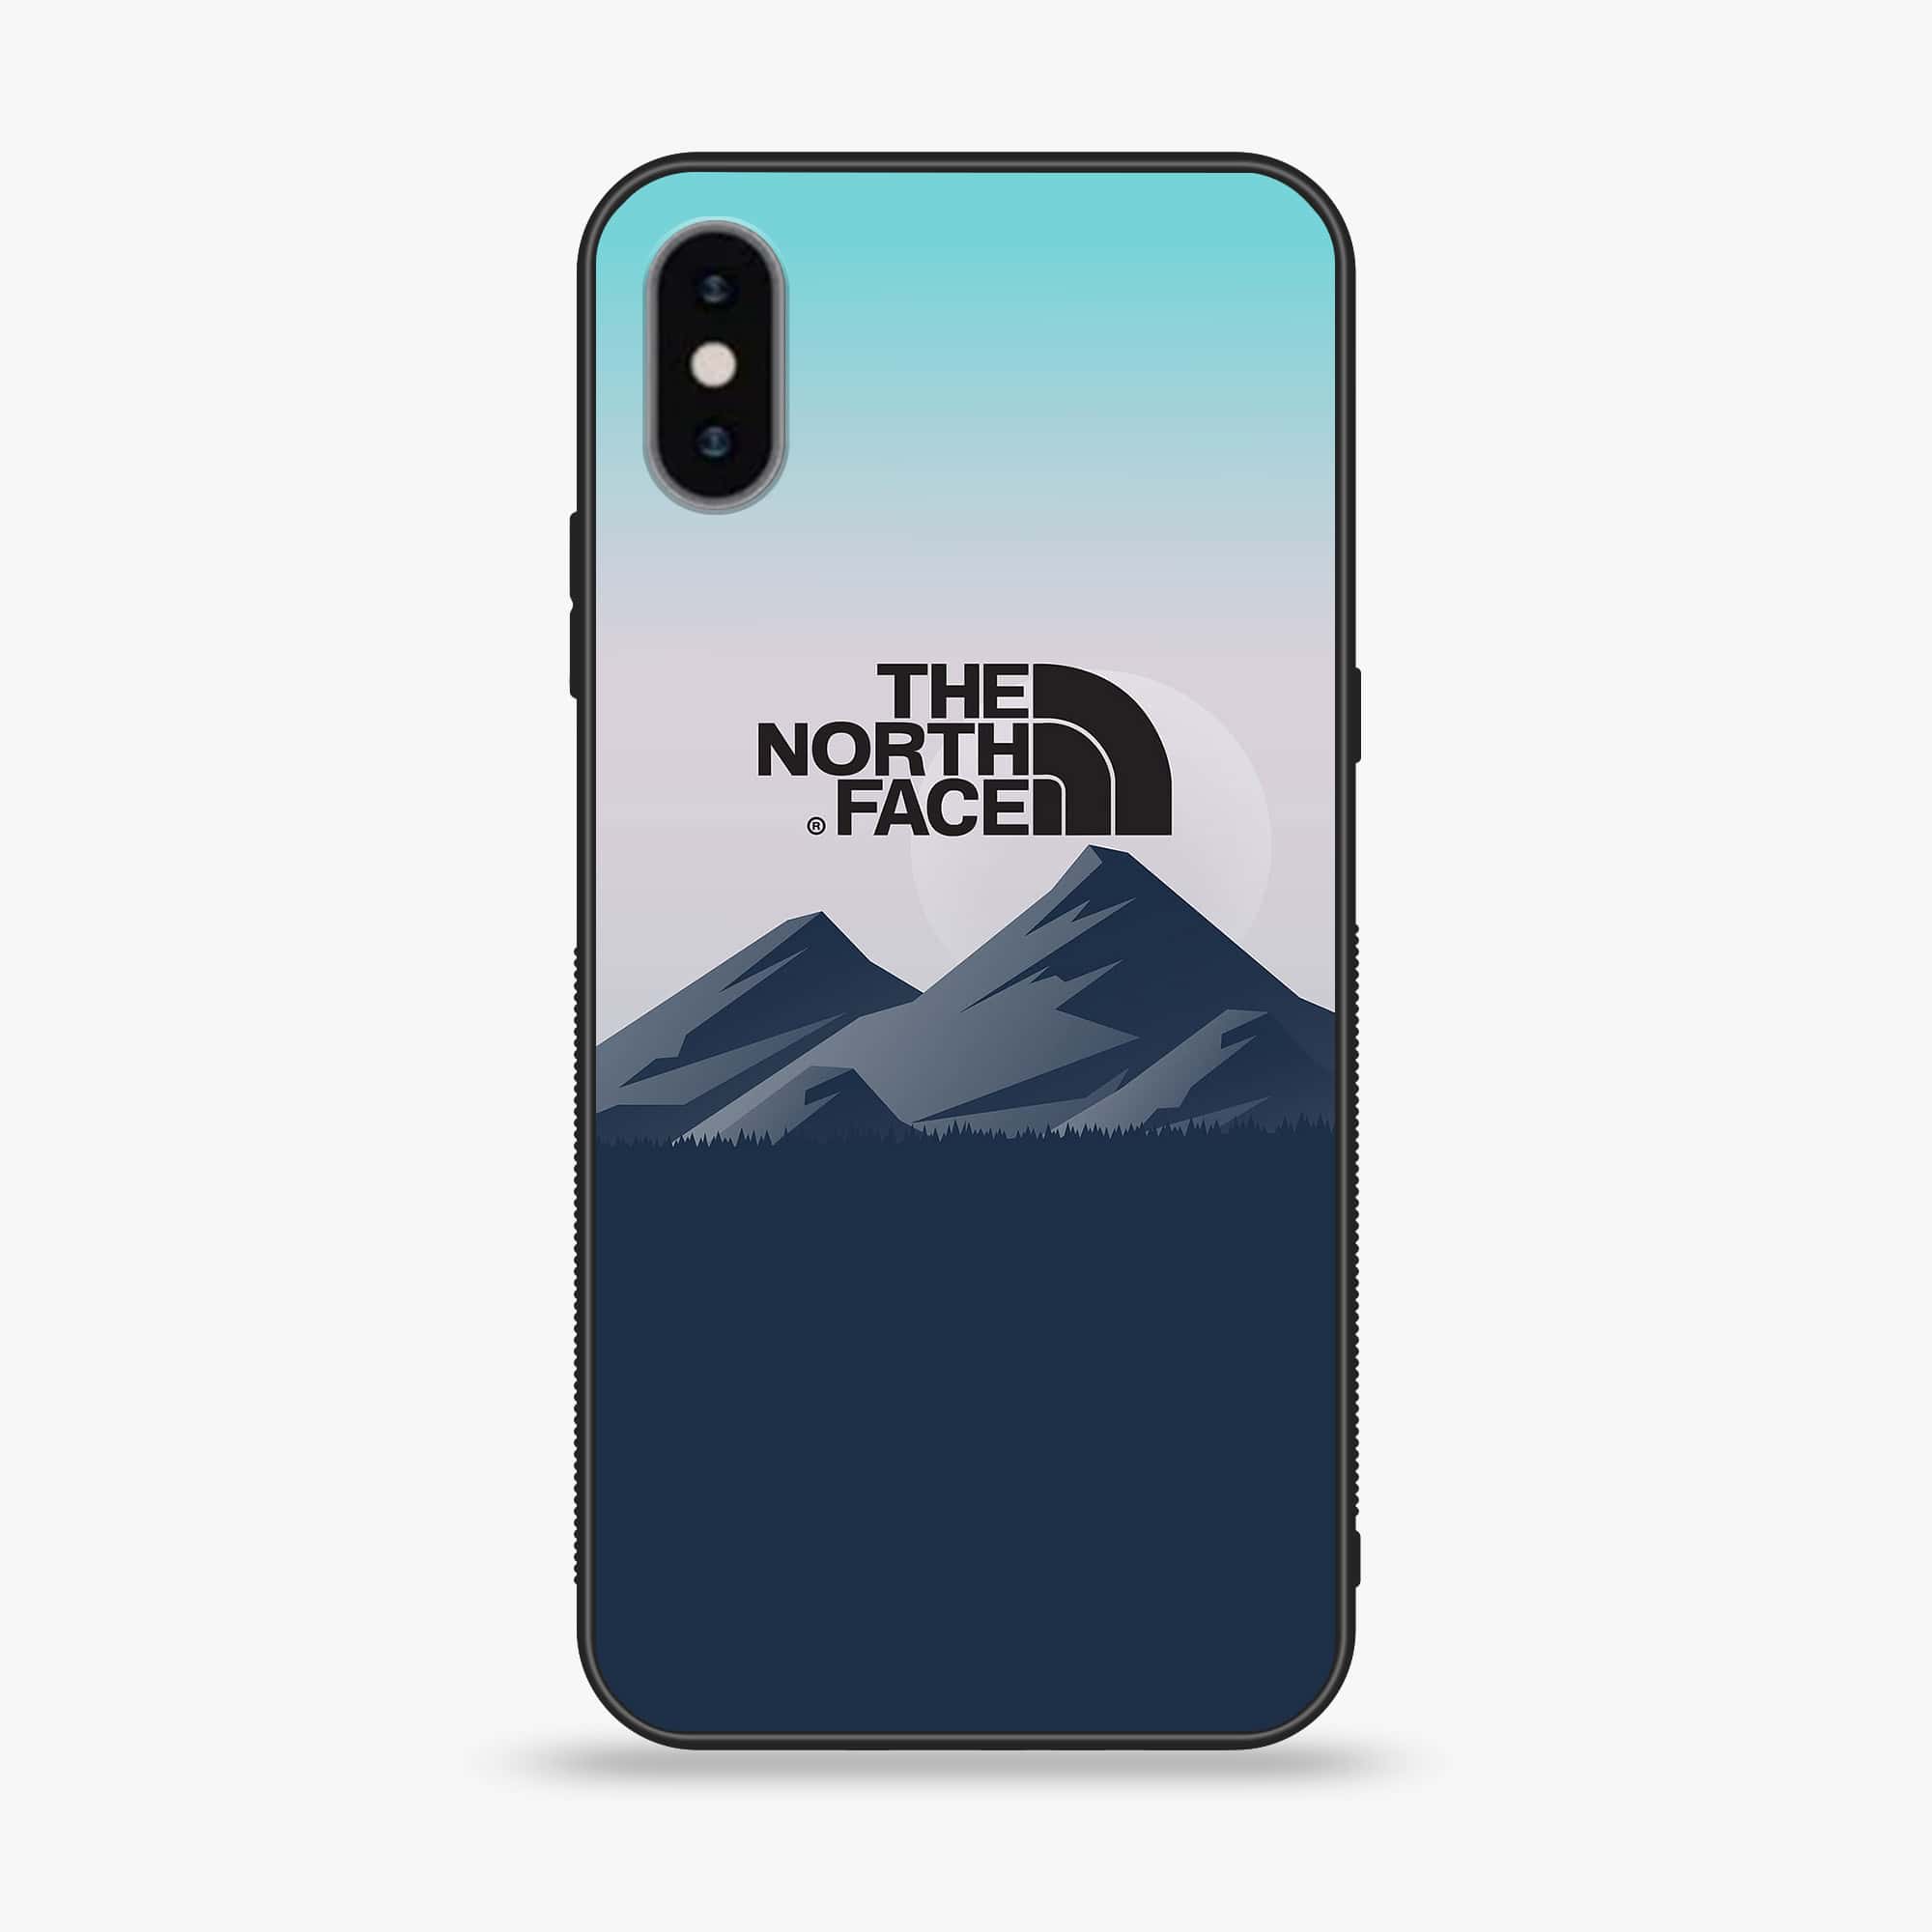 iPhone X/XS - The North Face Series - Premium Printed Glass soft Bumper shock Proof Case